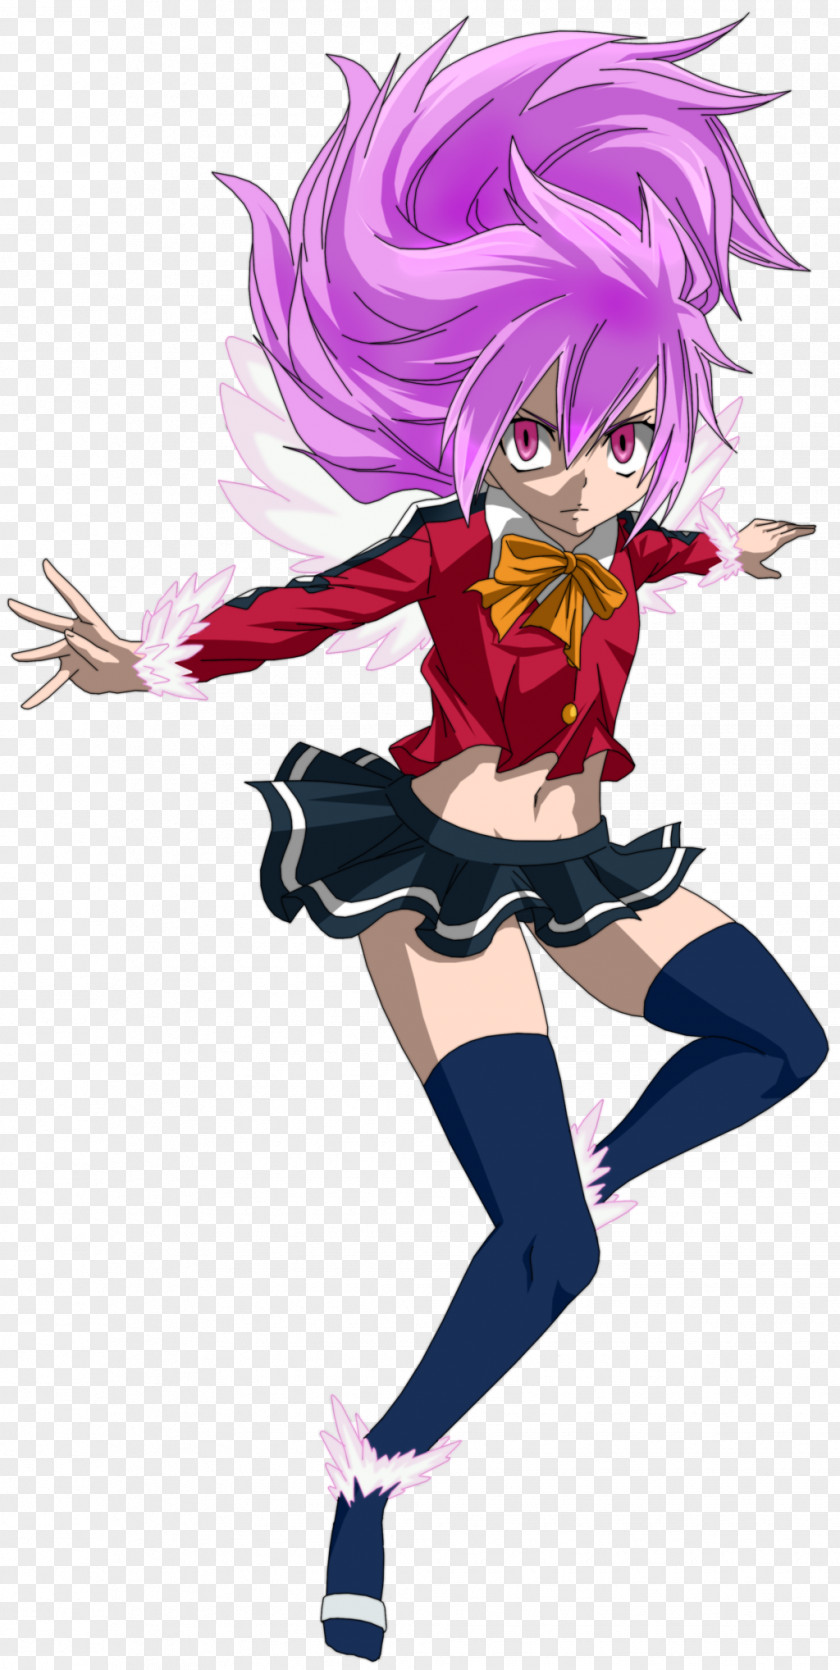 Fairy Tail Dragon Force Wendy Marvell Natsu Dragneel PNG